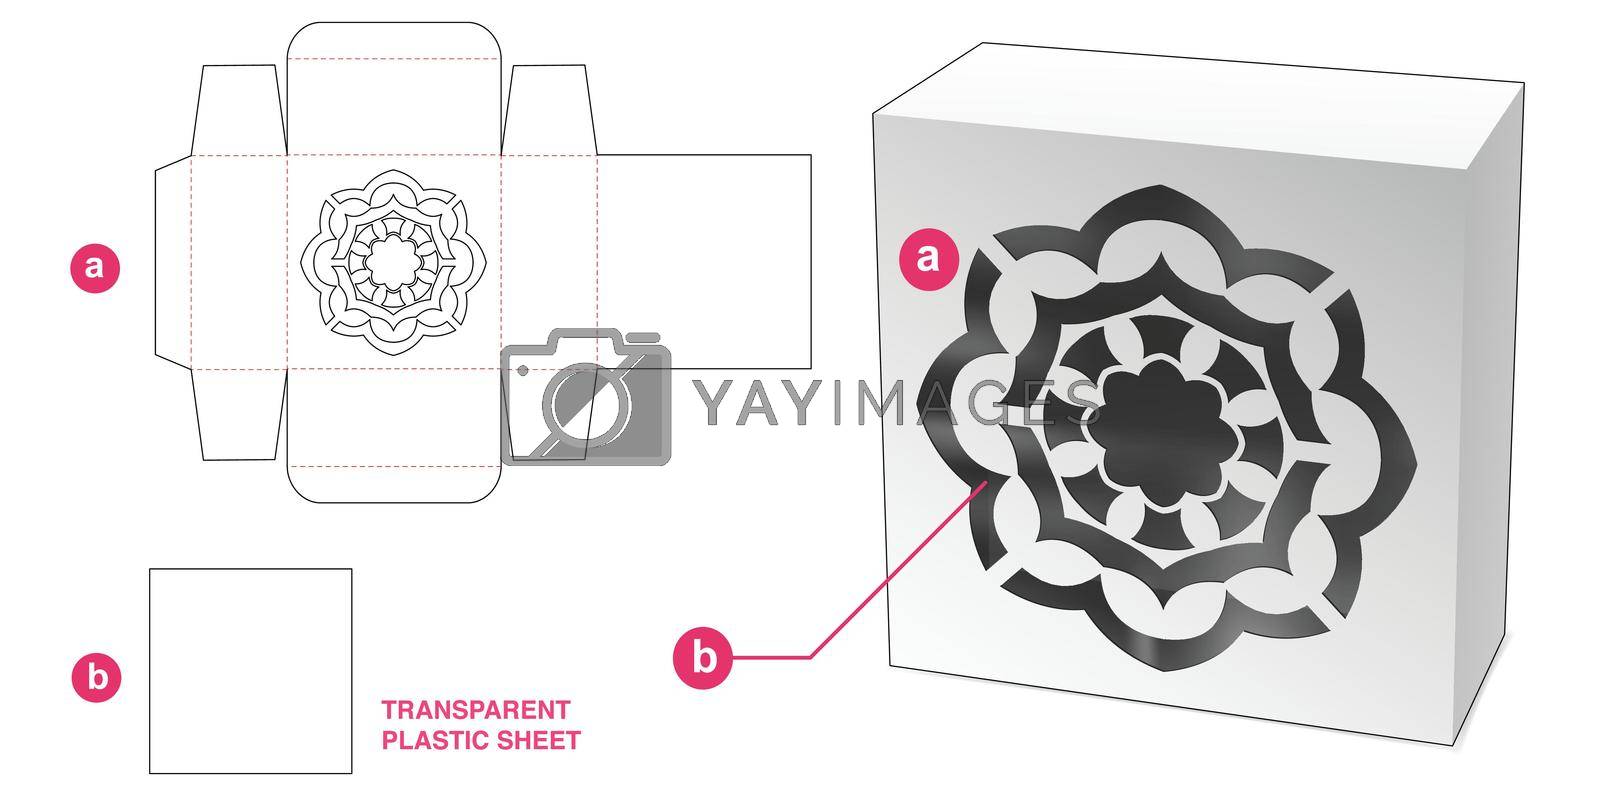 Royalty free image of Box with stenciled mandala window die cut template by valueinvestor